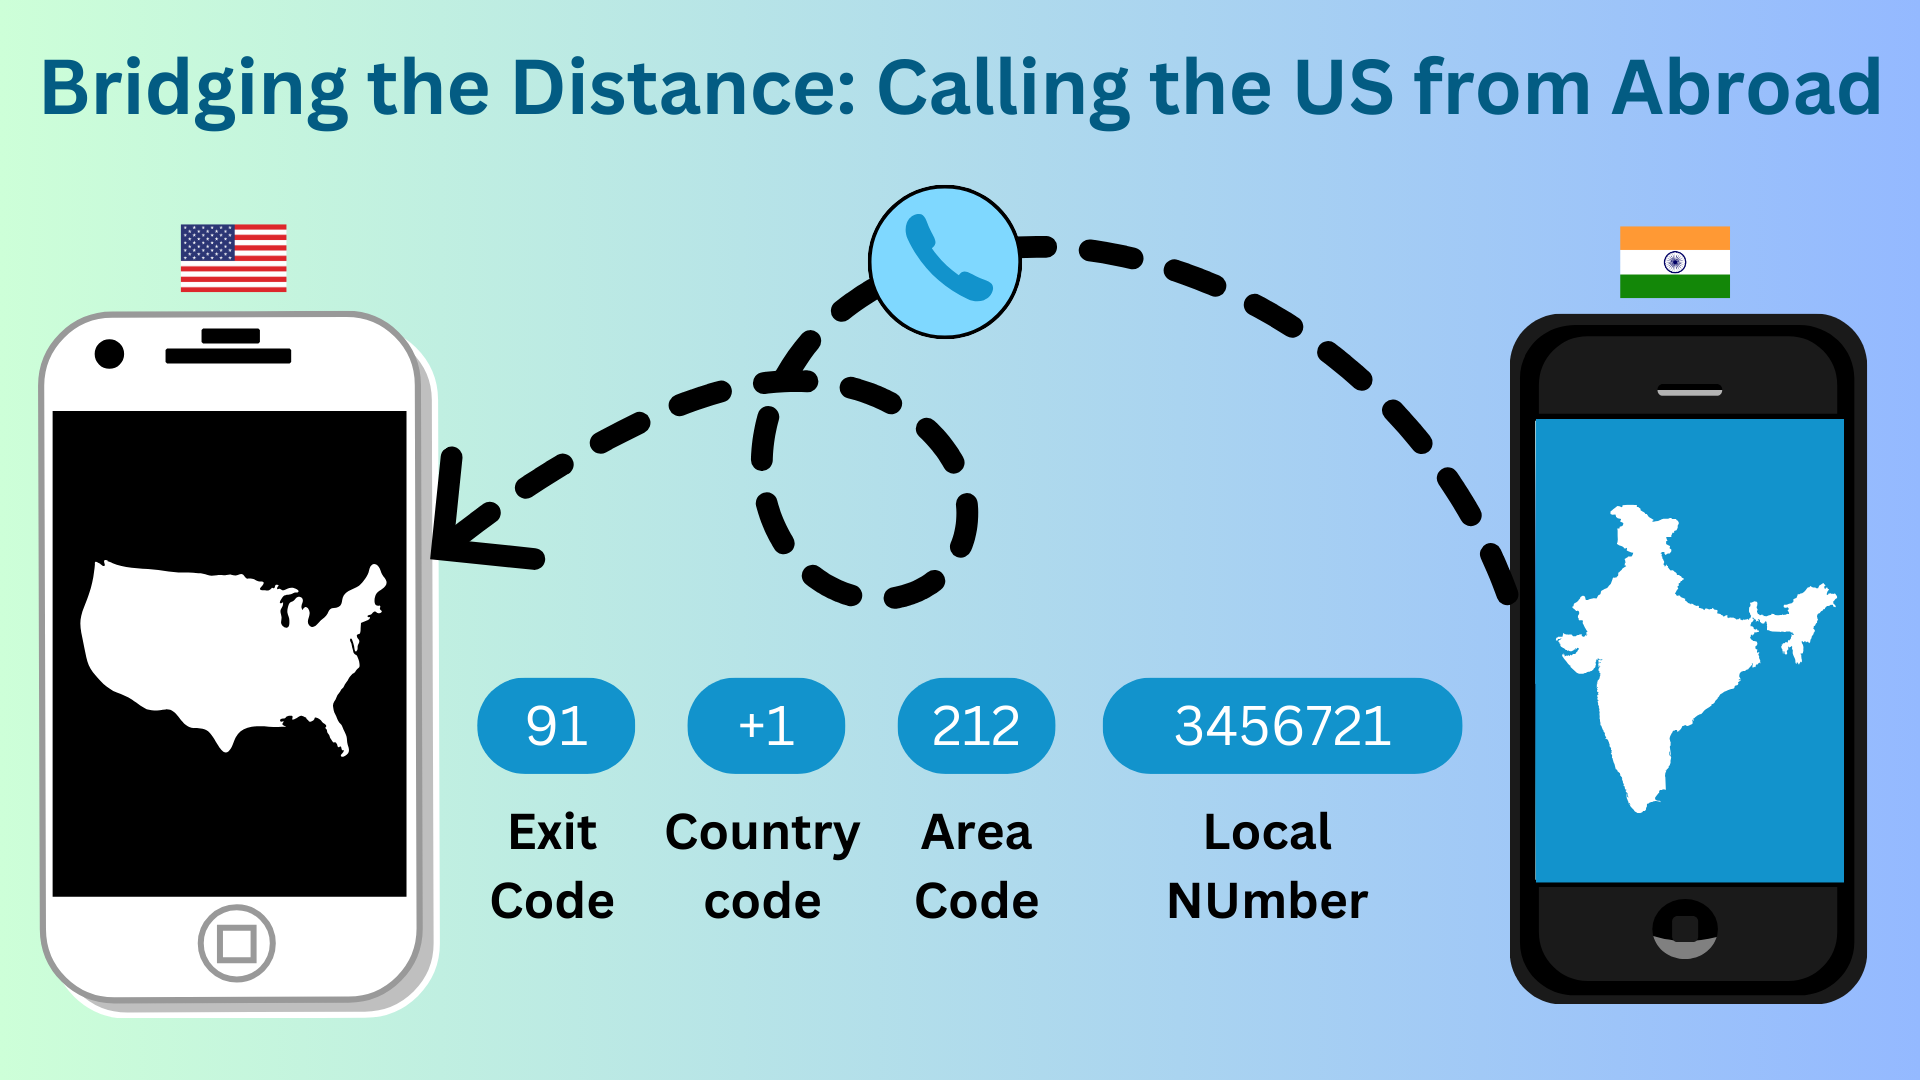 Bridging the Distance: Calling the US from Abroad